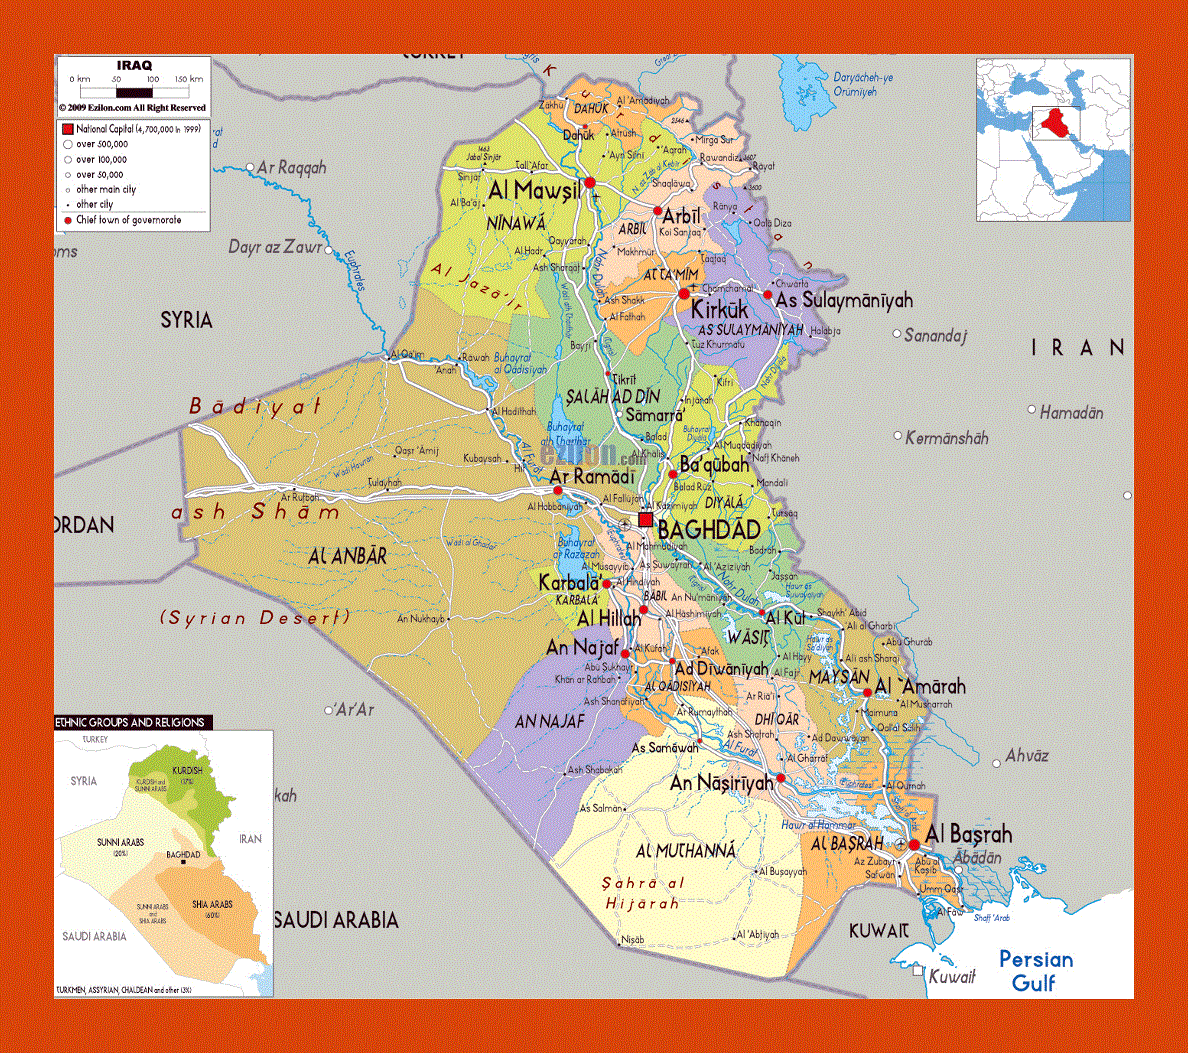 Political and administrative map of Iraq